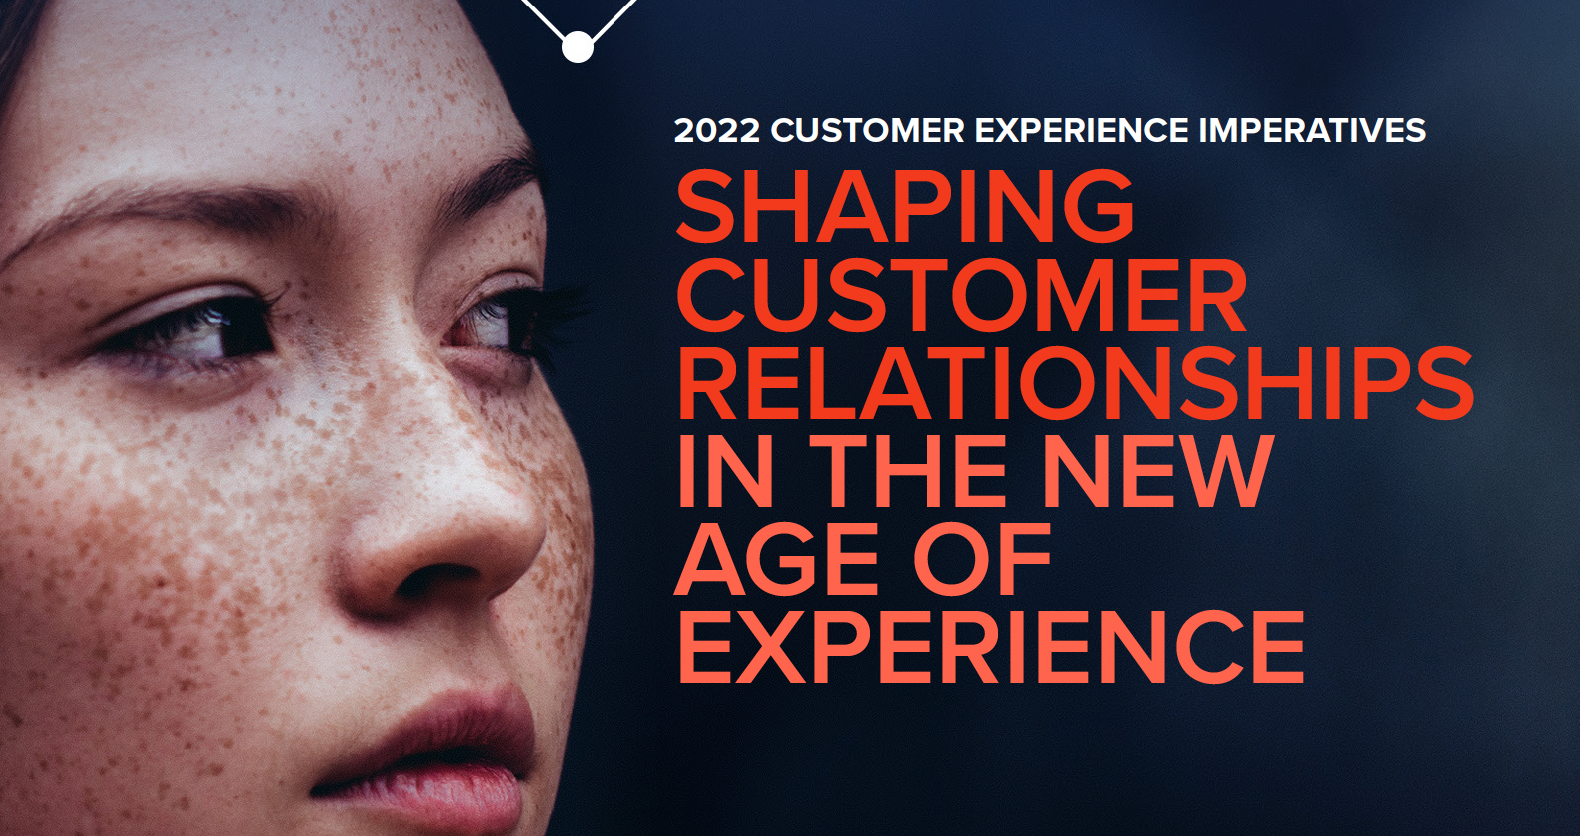 CX Imperatives 2022 | Shaping customer relationships in the new age of experience